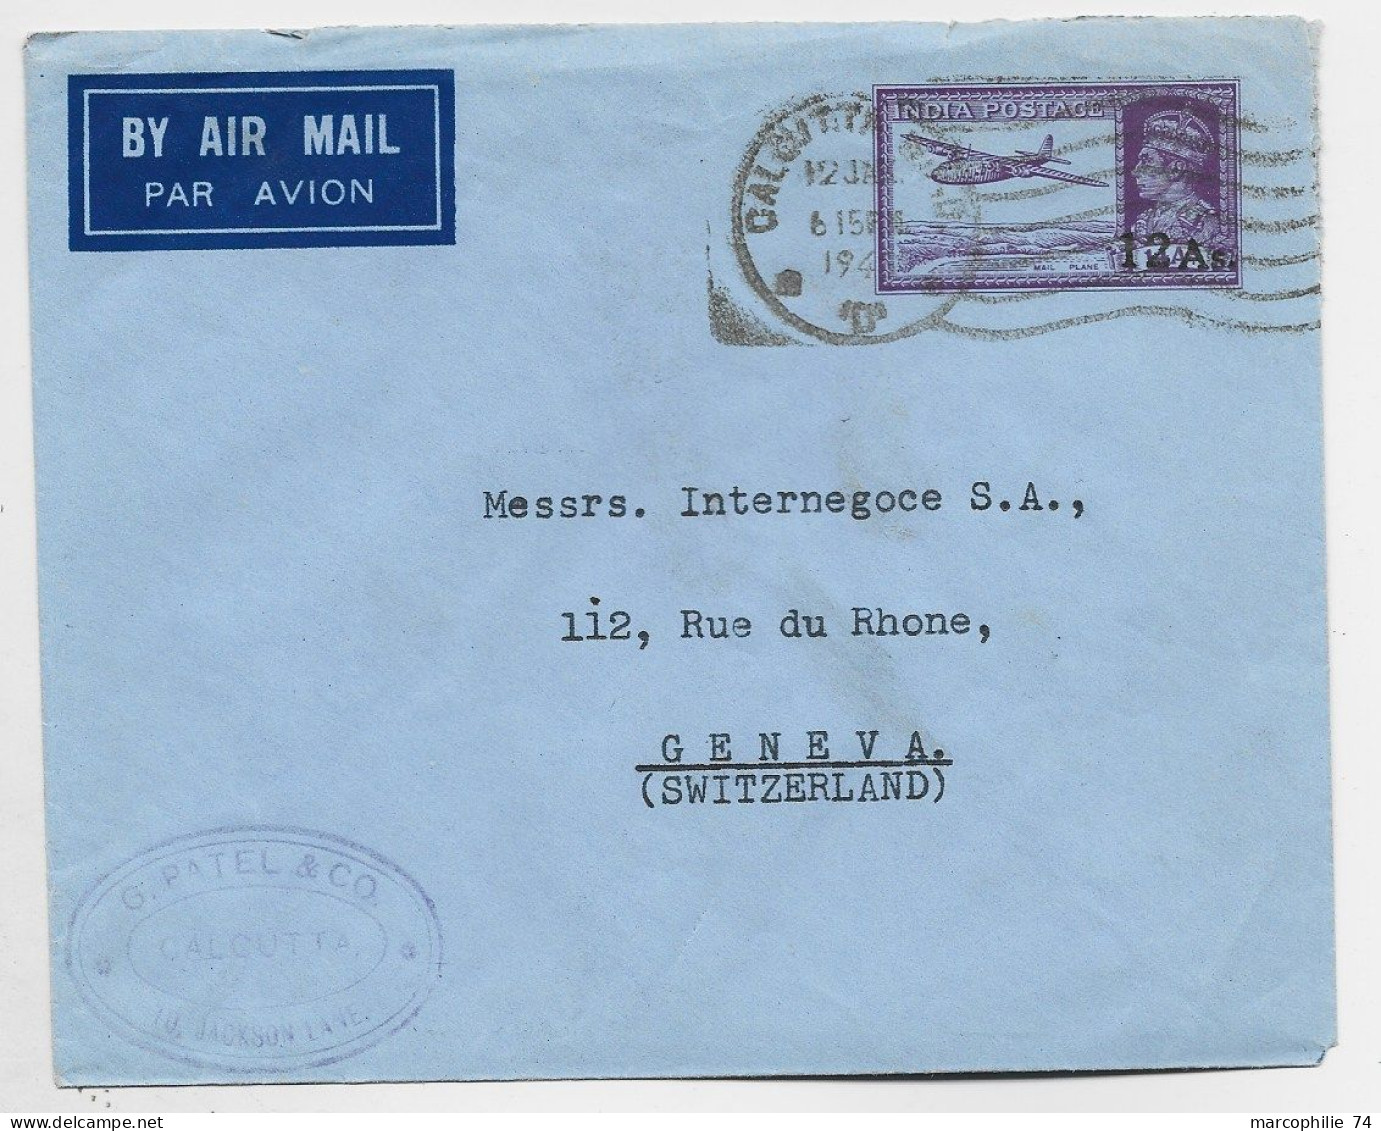 INDIA POSTAGE 12AS ENTIER ENVELOPPE COVER AIR MAIL CALCUTTA 1947 TO SUISSE - 1936-47 Koning George VI